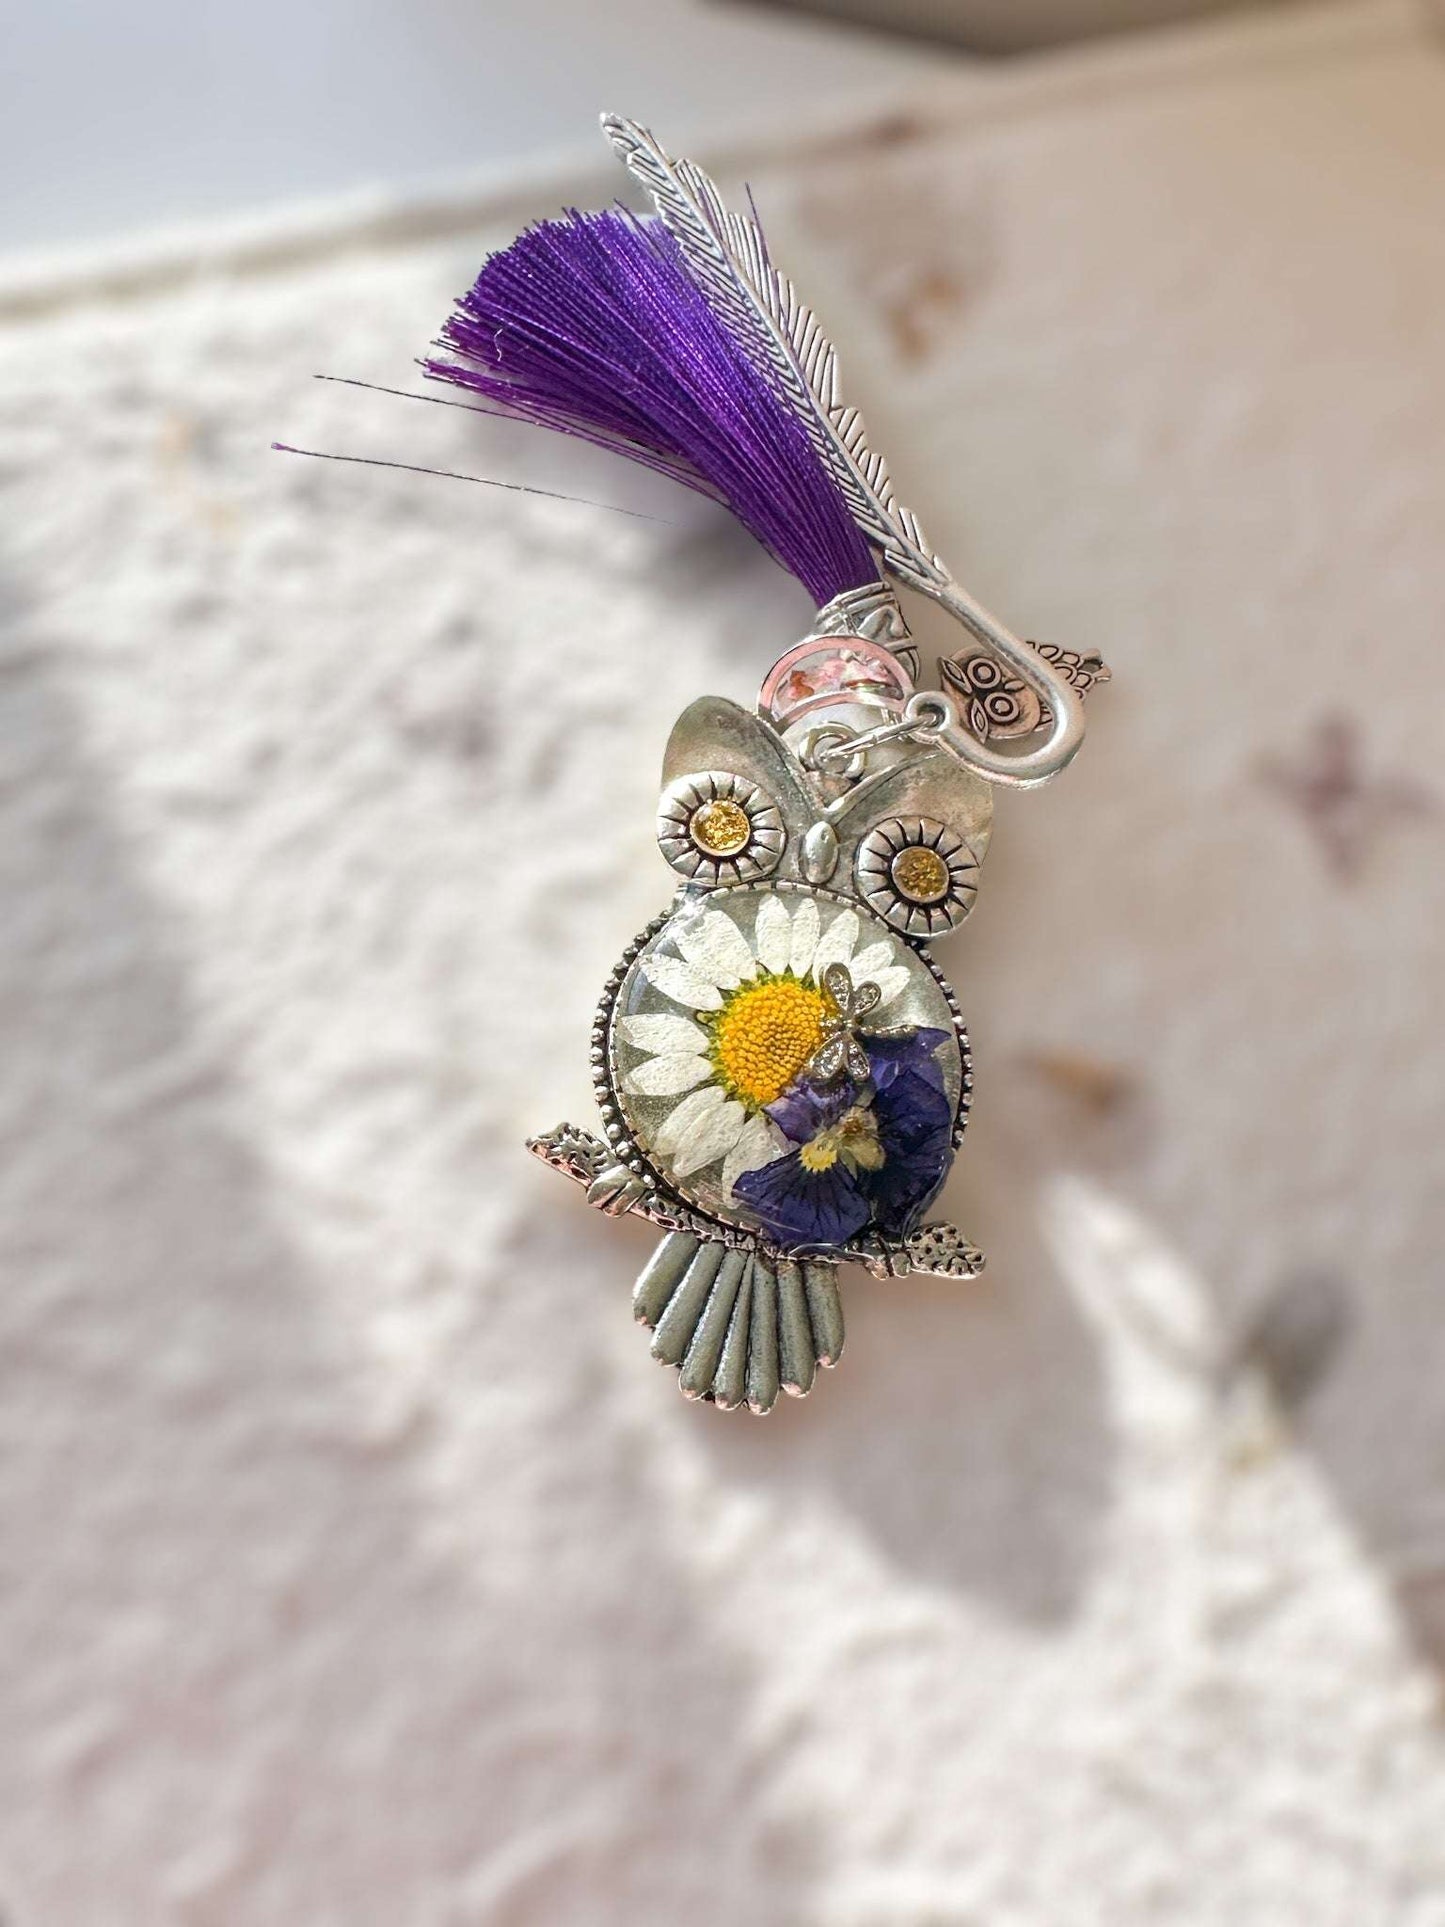 Owl Themed Pressed Flower Bookmarks Whimsical Book Accessories